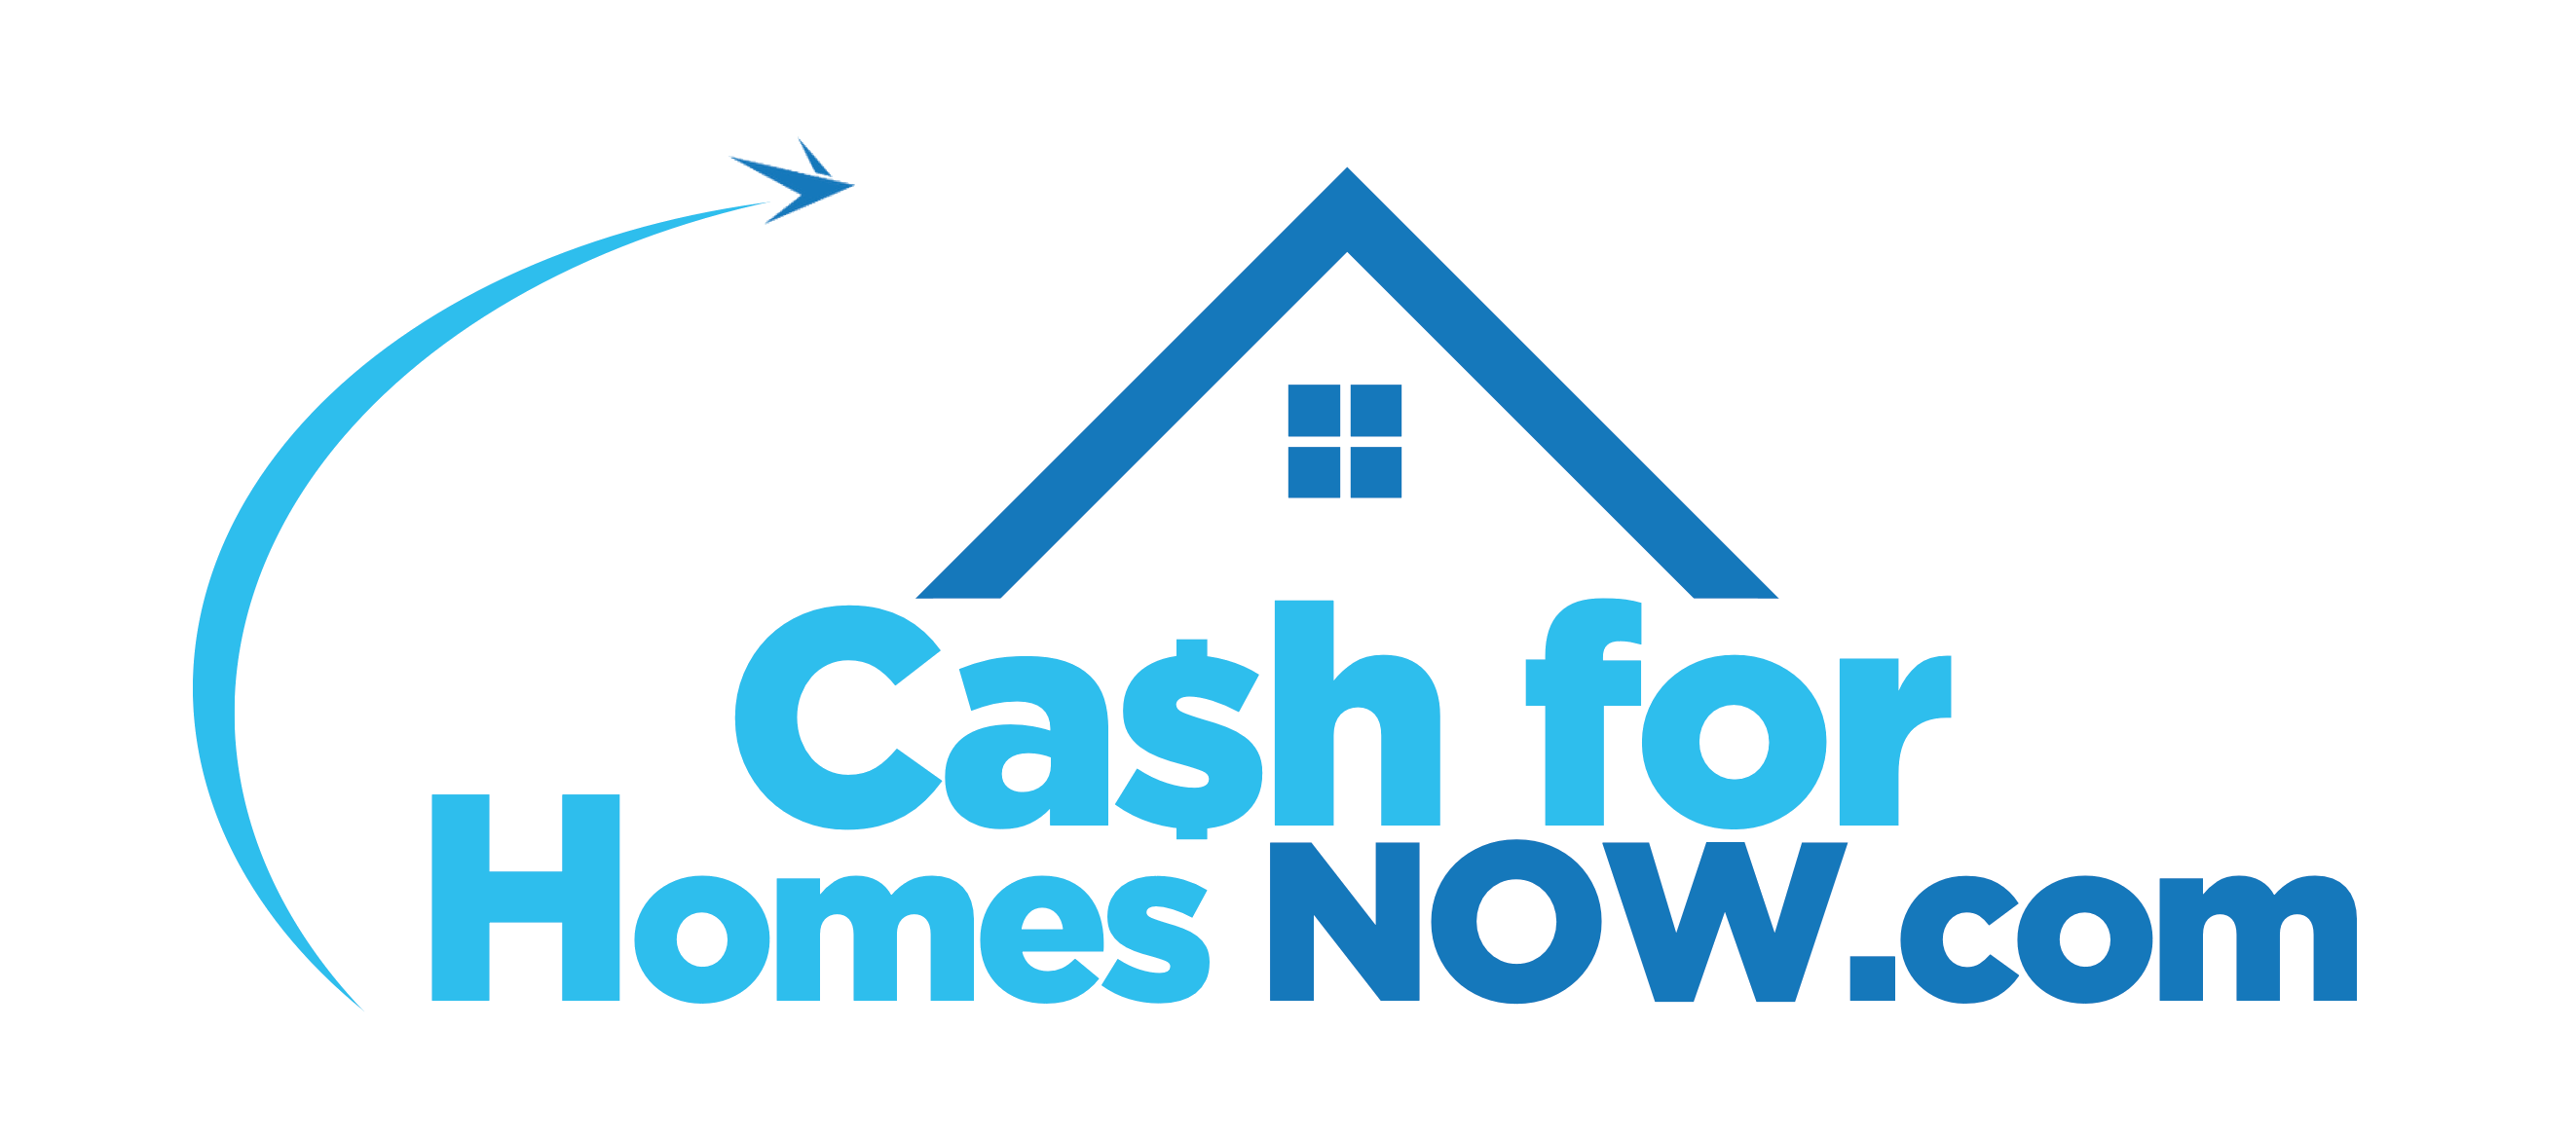 Cash For Homes Now